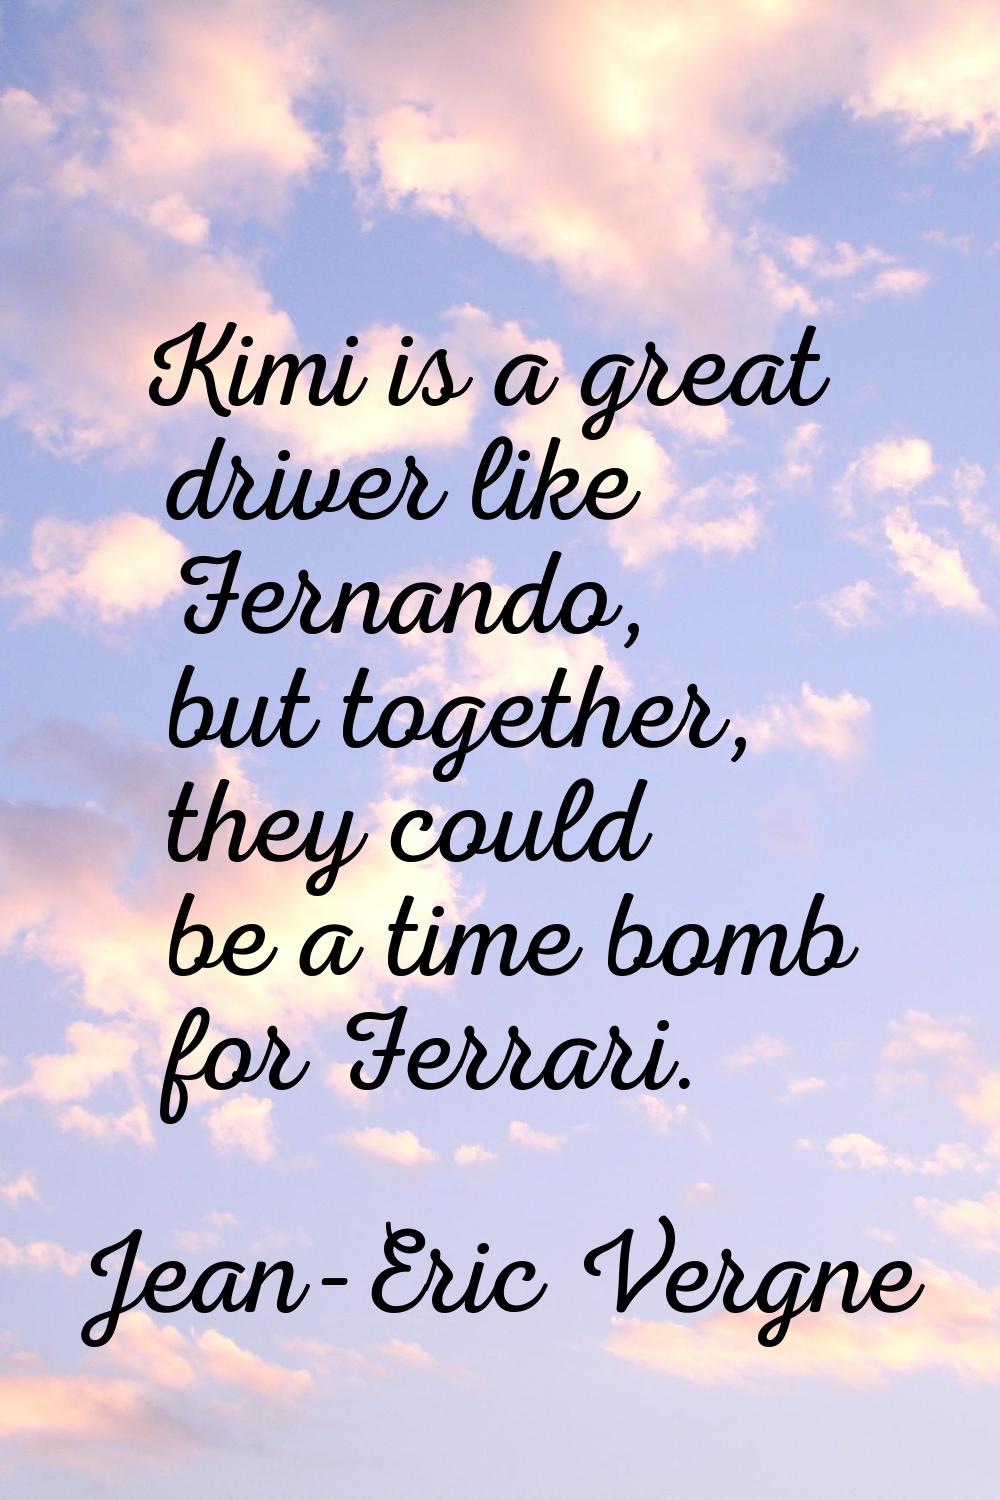 Kimi is a great driver like Fernando, but together, they could be a time bomb for Ferrari.